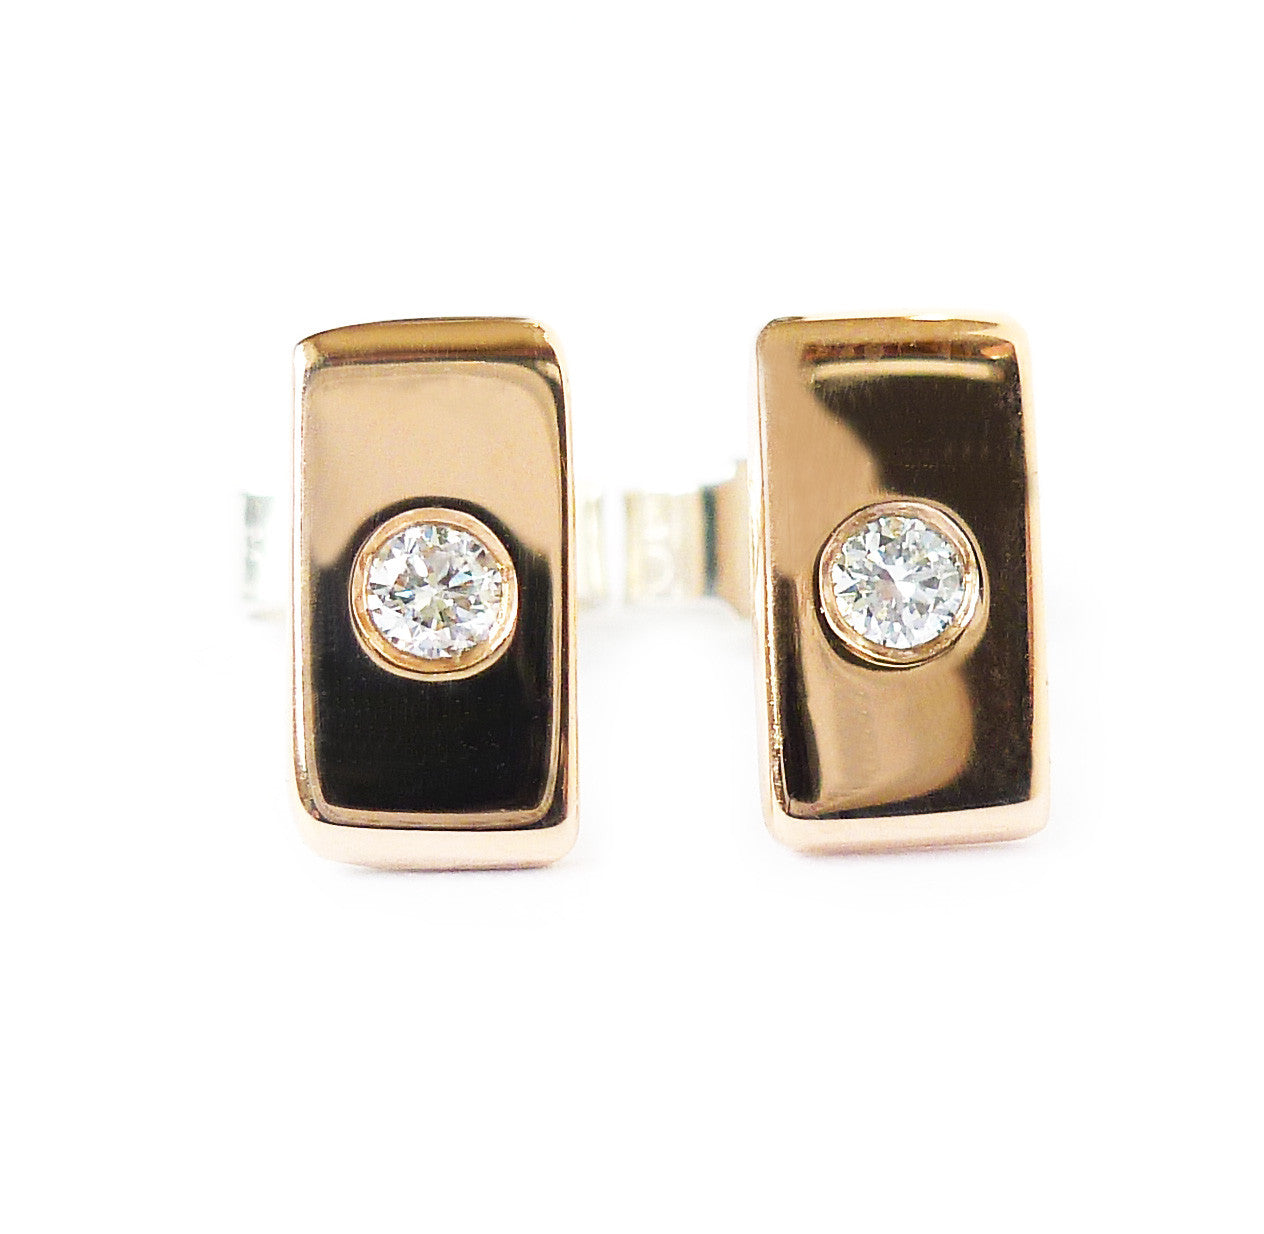 18k rose gold and diamond earrings (gr21a) - Sue Lane Contemporary Jewellery - 4